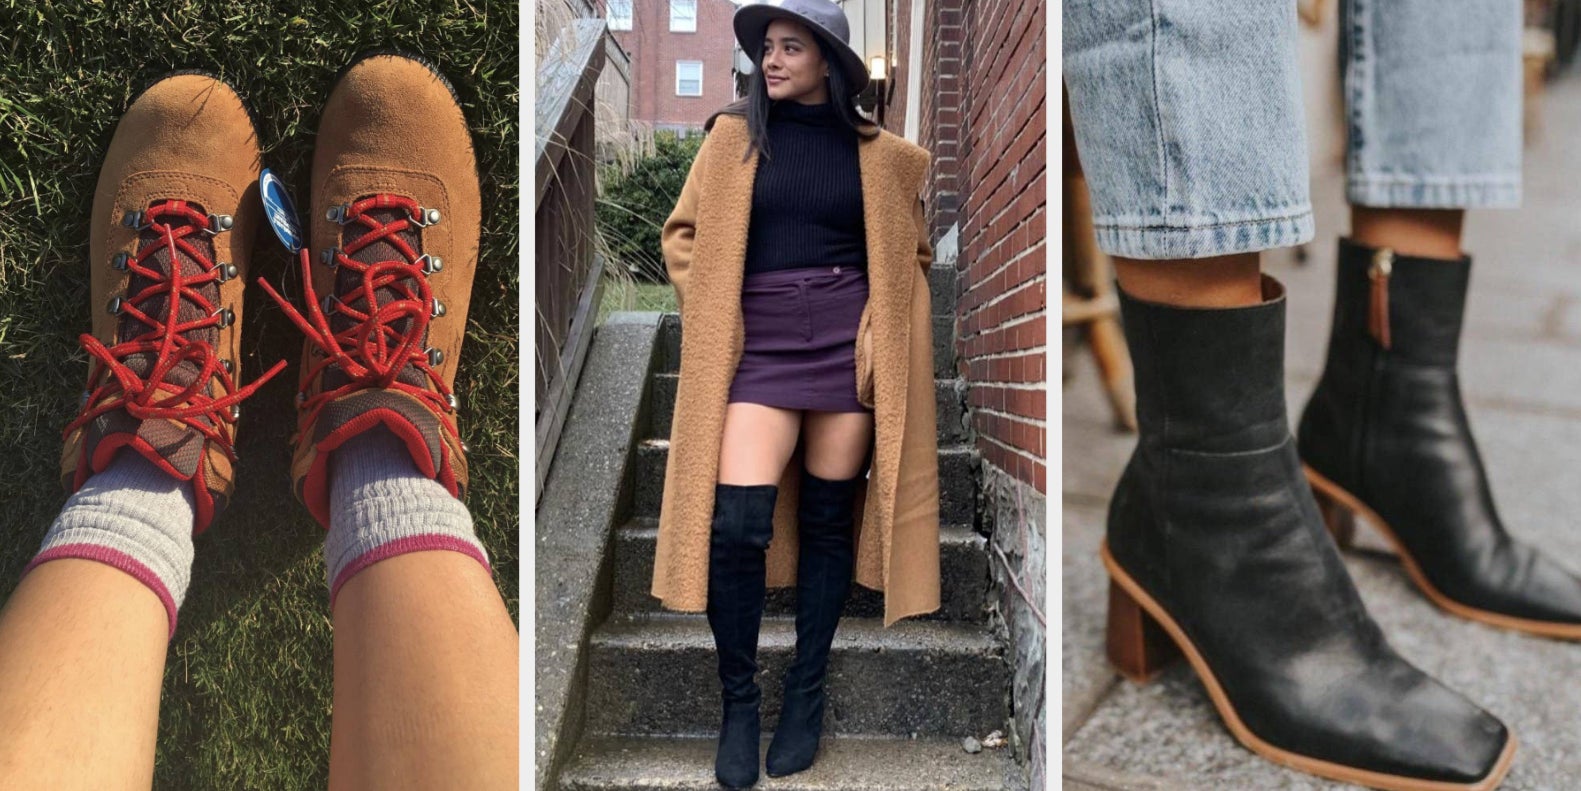 Brown Suede Knee High Boots Outfits (29 ideas & outfits)